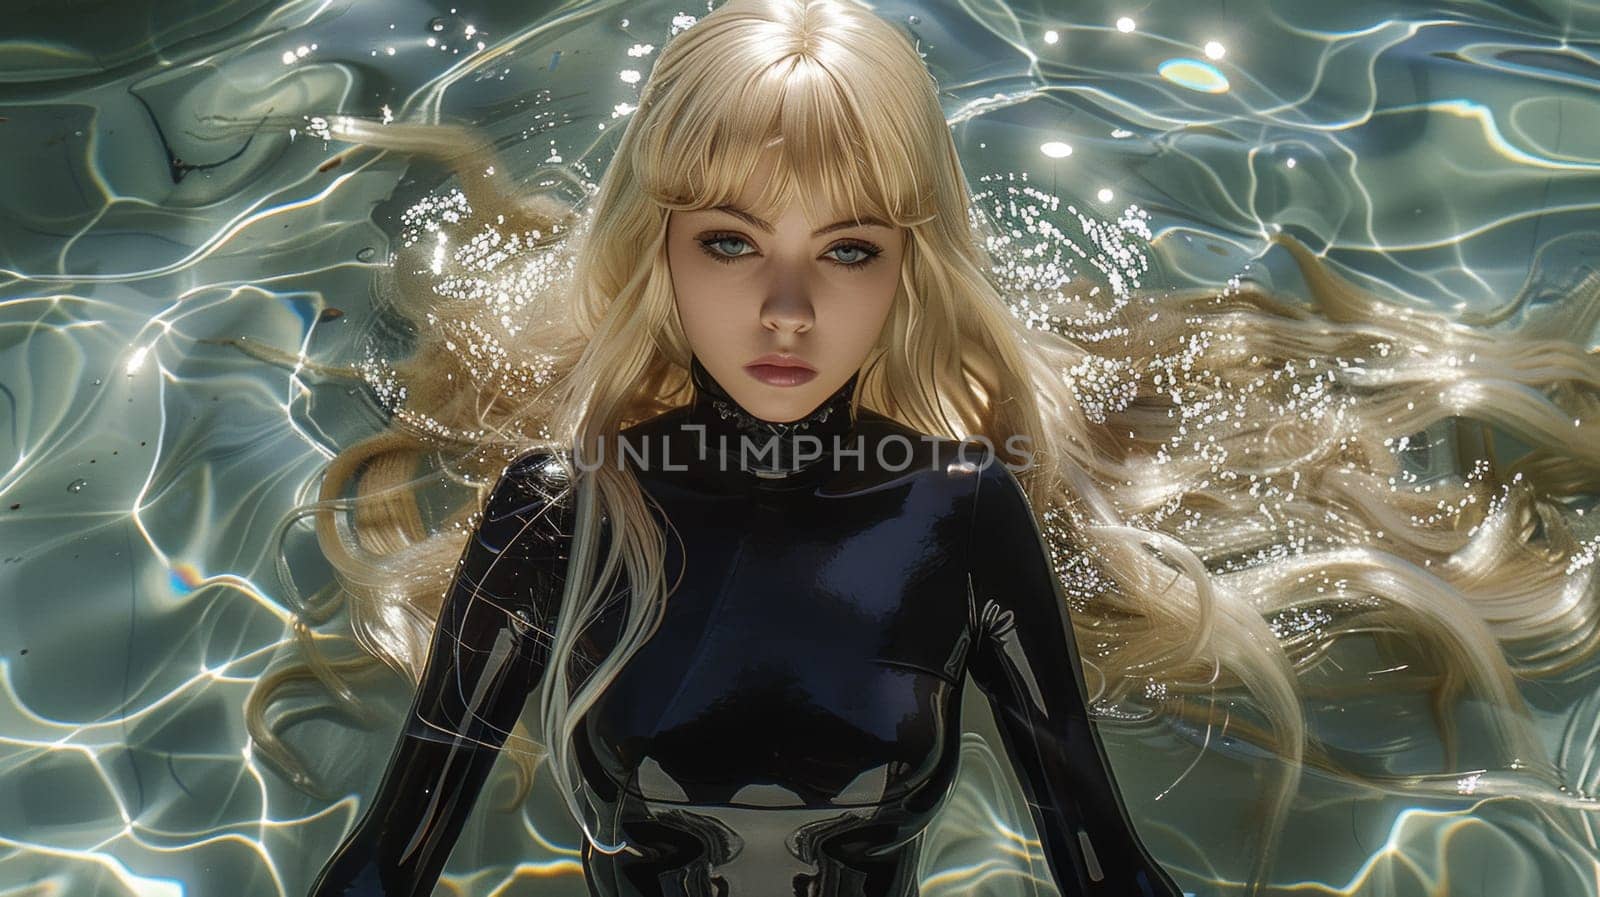 A woman with blonde hair in a black suit floating on water